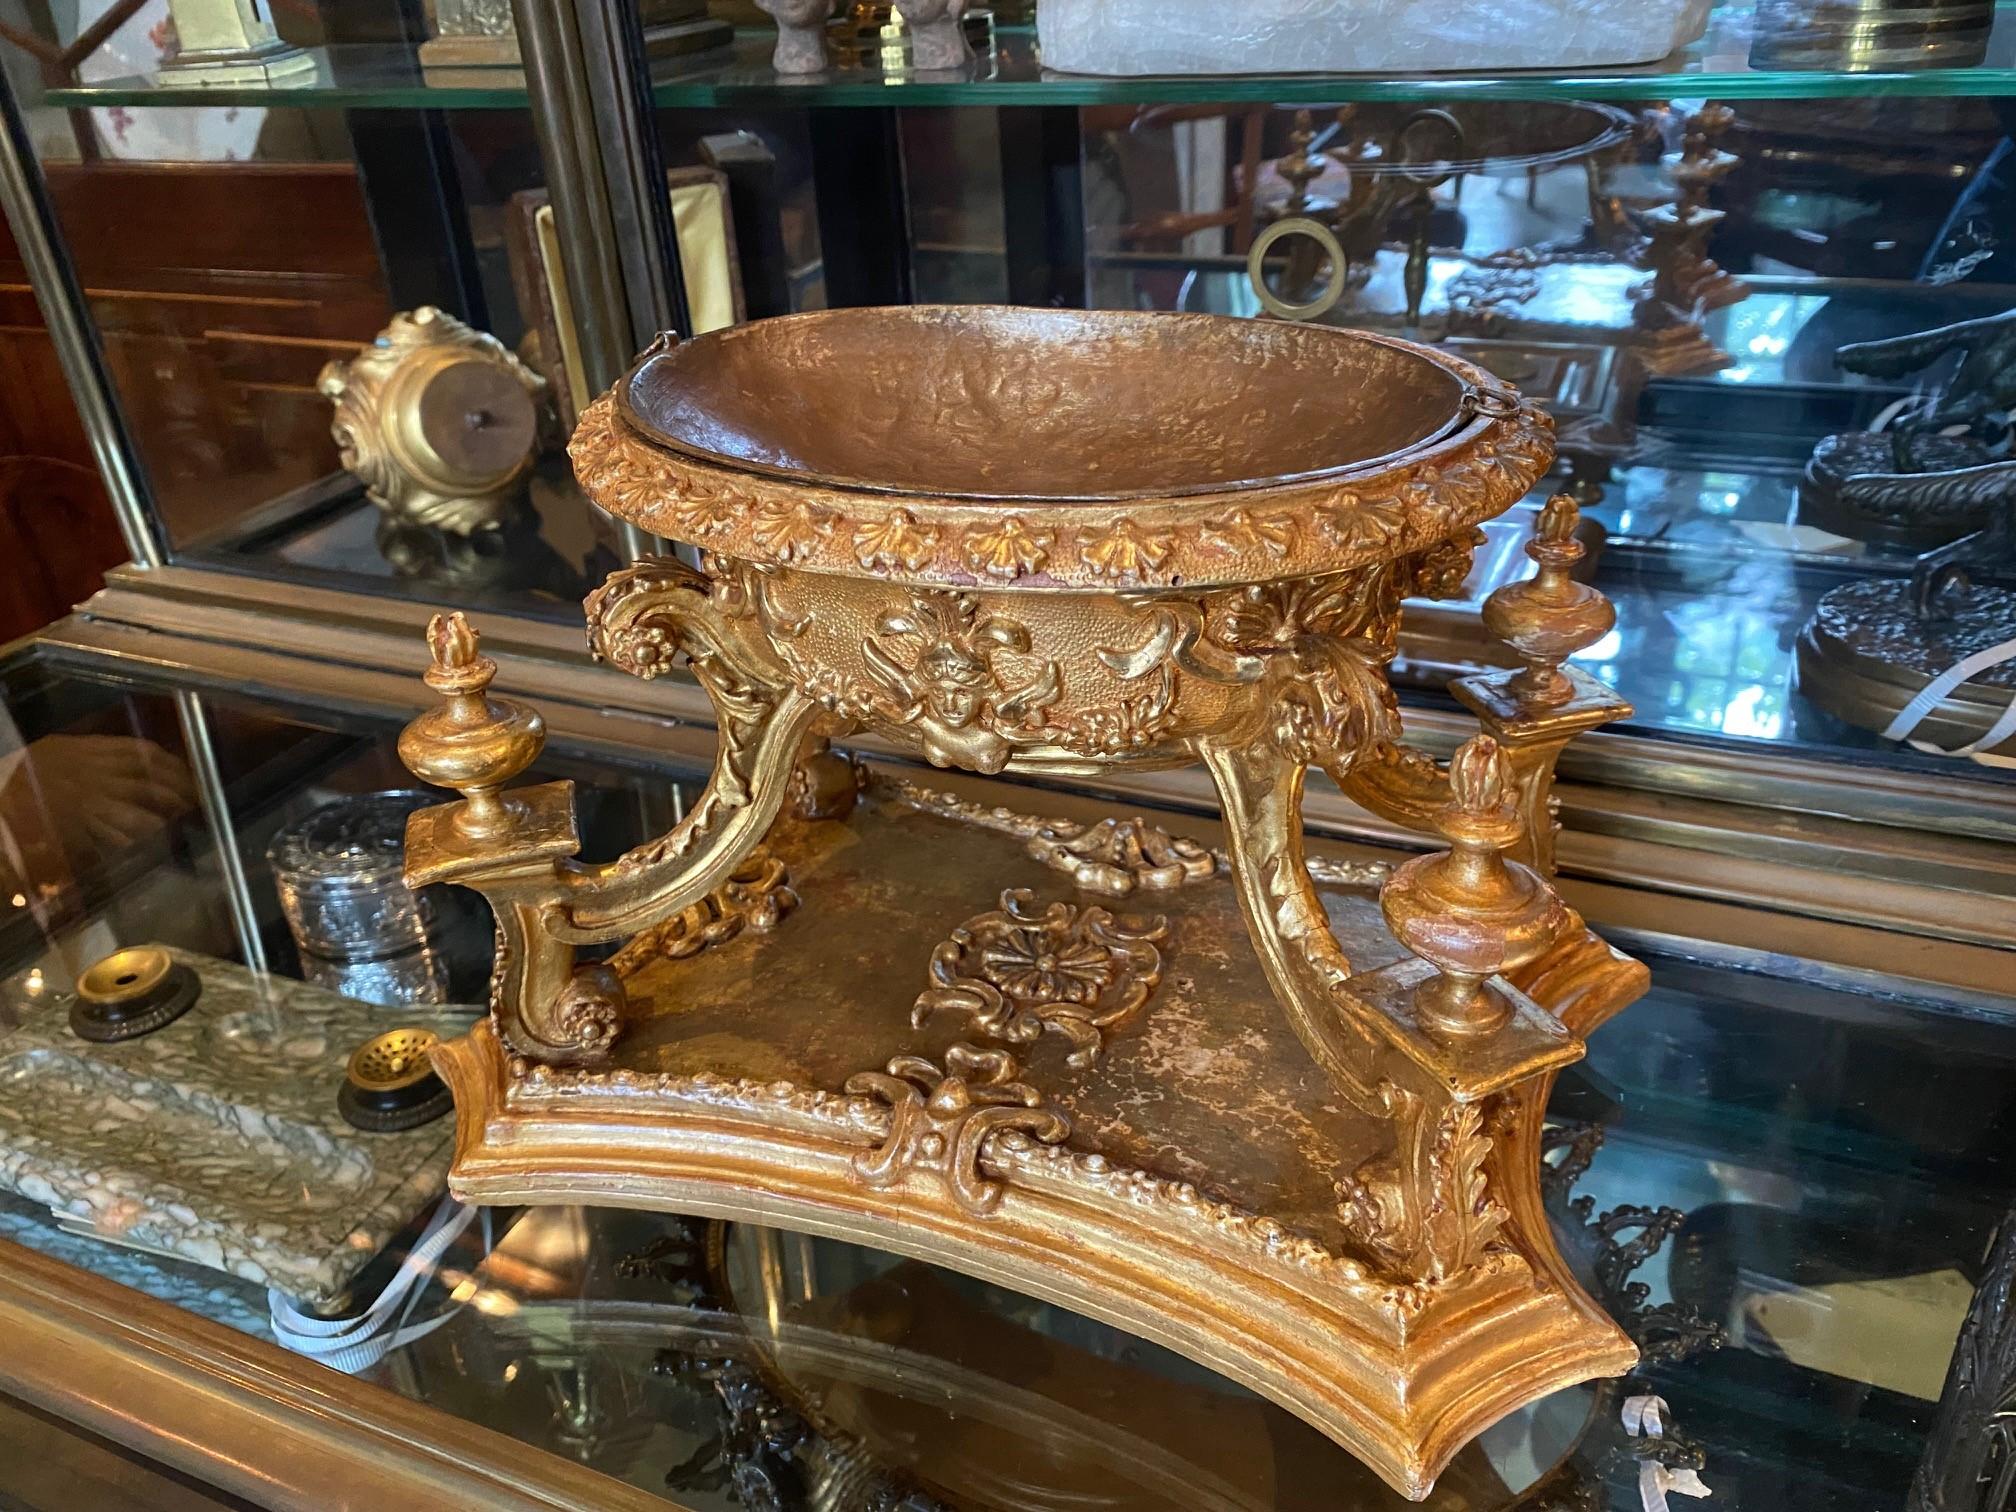 Antique Hand Carved Gilt Wood Basket Dish Vide poche bowl Table Center Piece 
Very Early 18th Century Giltwood Italian Baroque Centerpiece . This beautiful garniture on a desk a table or a console will add instant elegance . A center piece on an